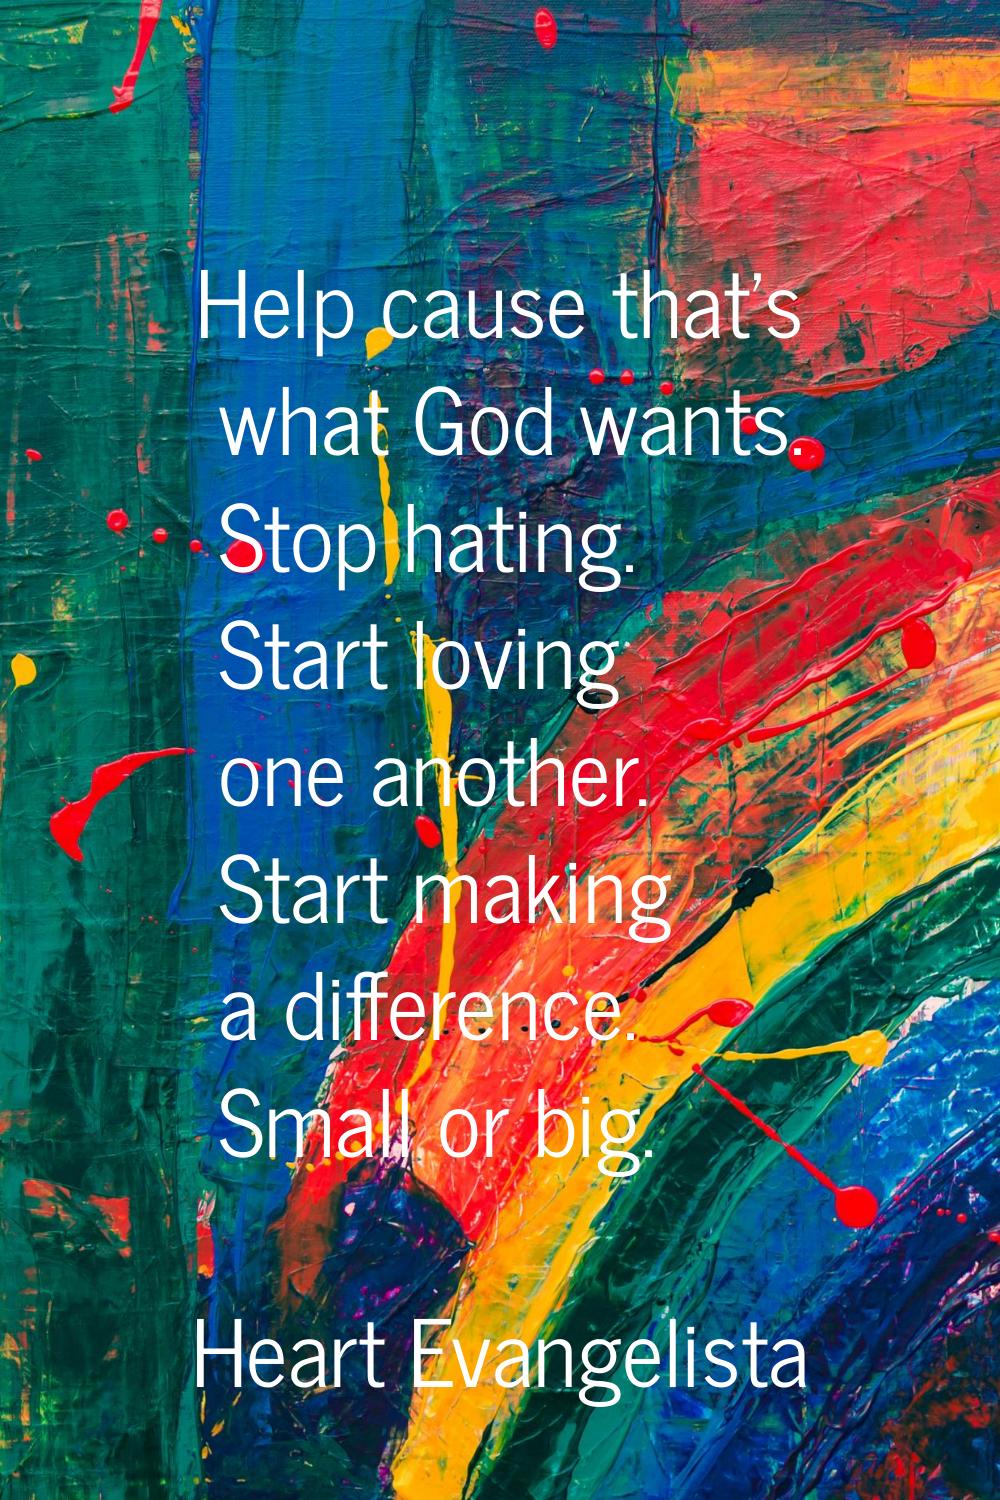 Help cause that's what God wants. Stop hating. Start loving one another. Start making a difference.